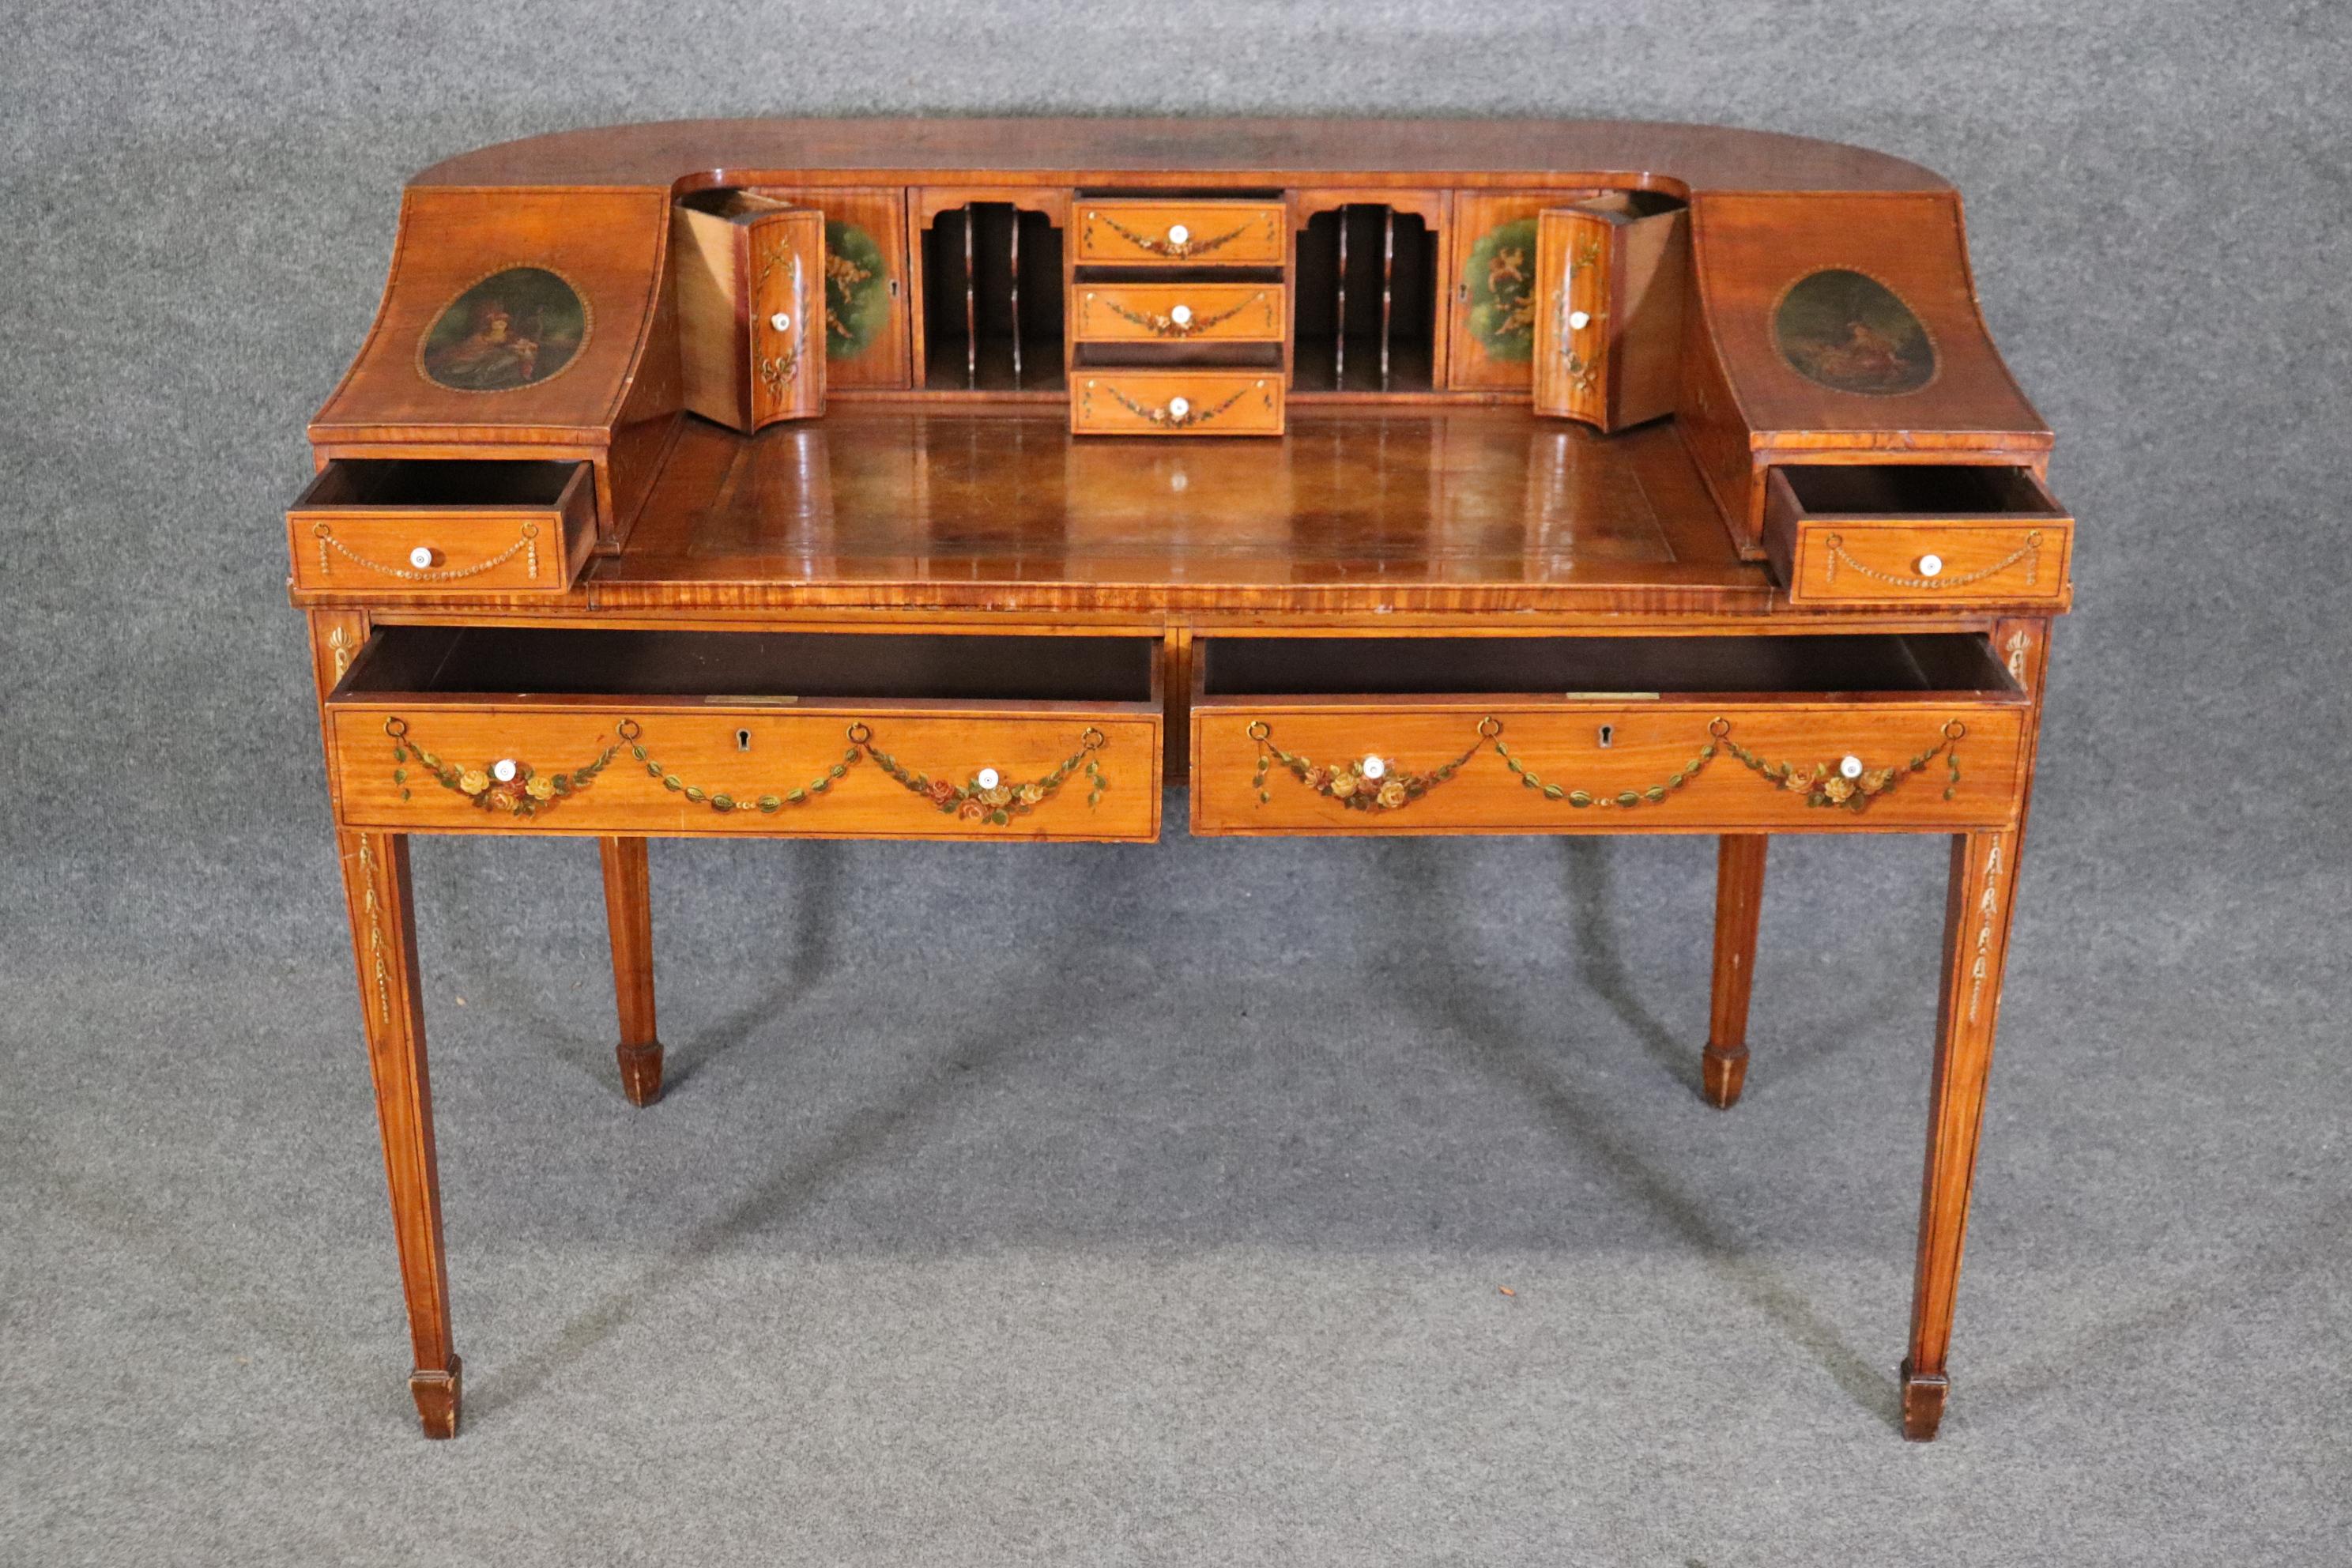 Fine Quality English Satinwood Carlton House Desk with Cherubs and Musical Theme For Sale 6